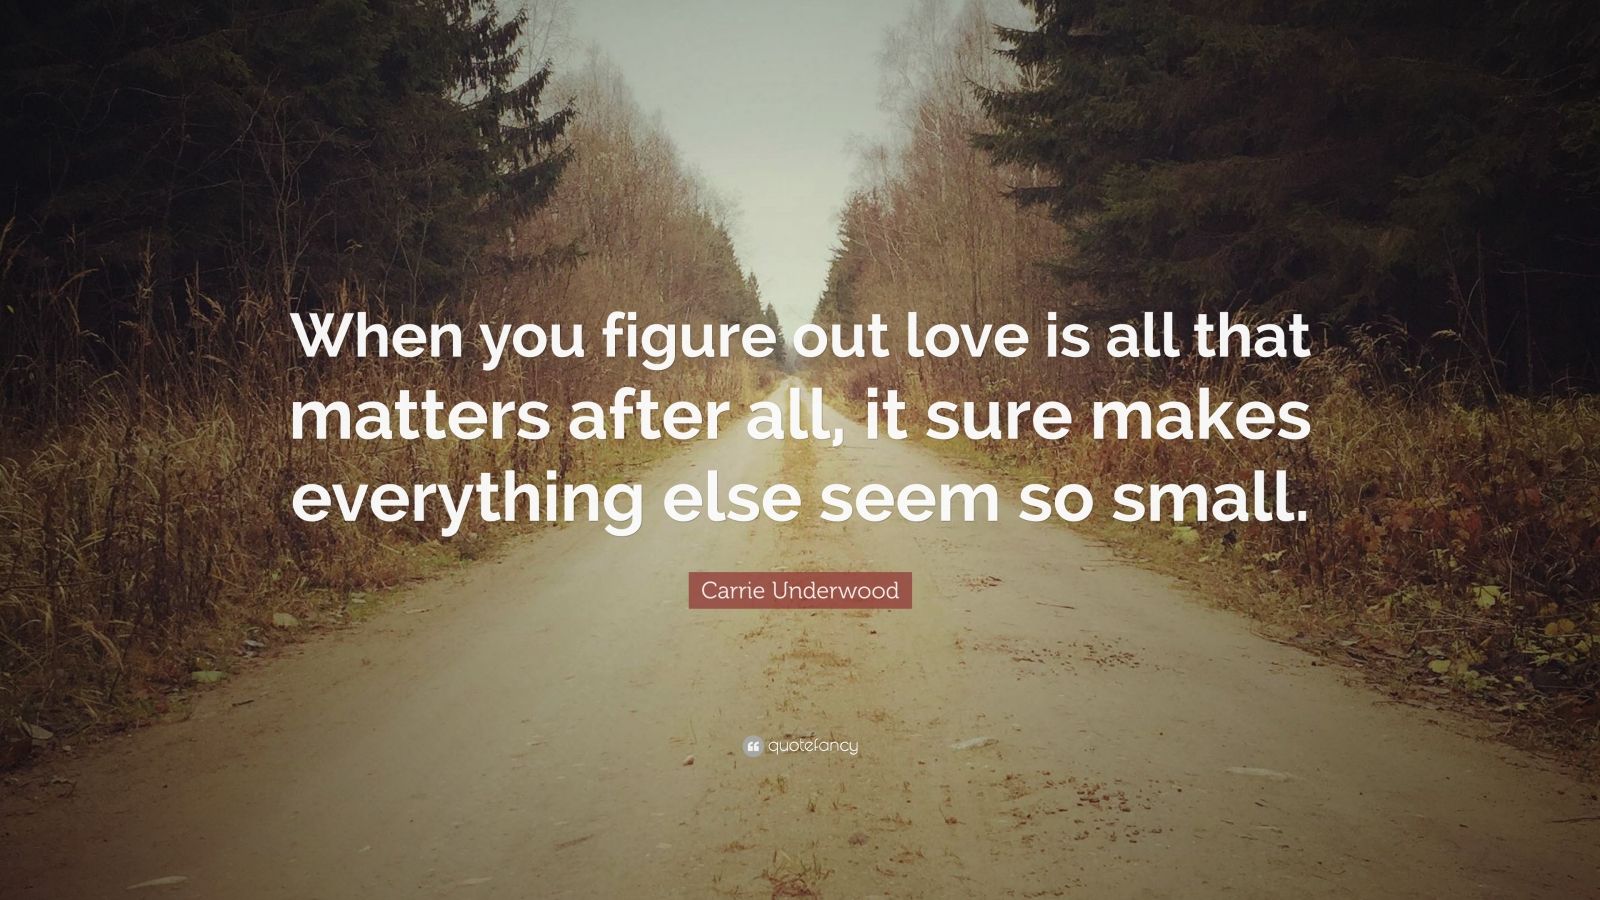 Carrie Underwood Quote: “When you figure out love is all that matters ...